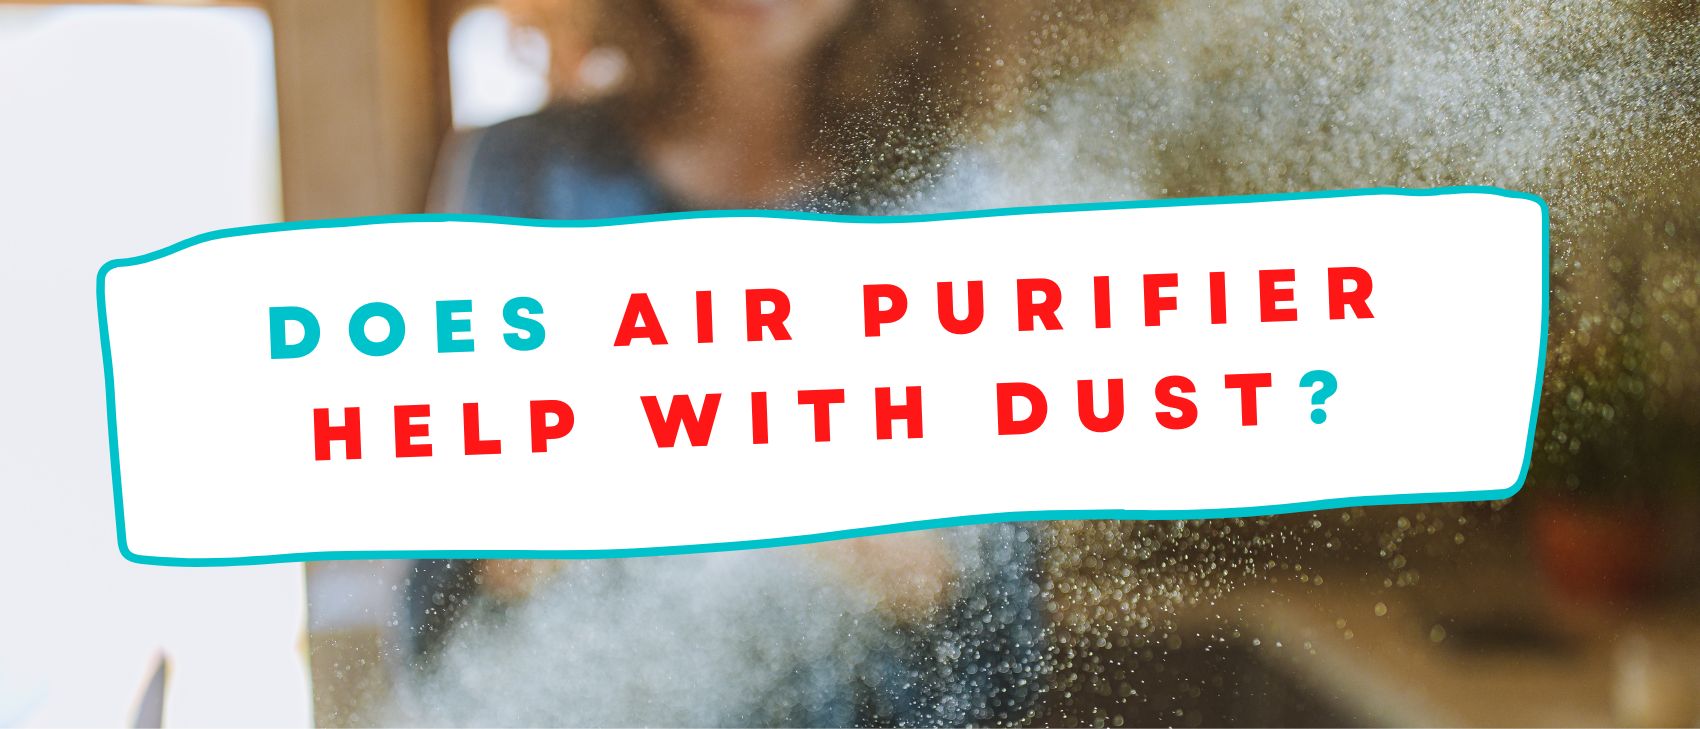 Does Air Purifier Help With Dust?